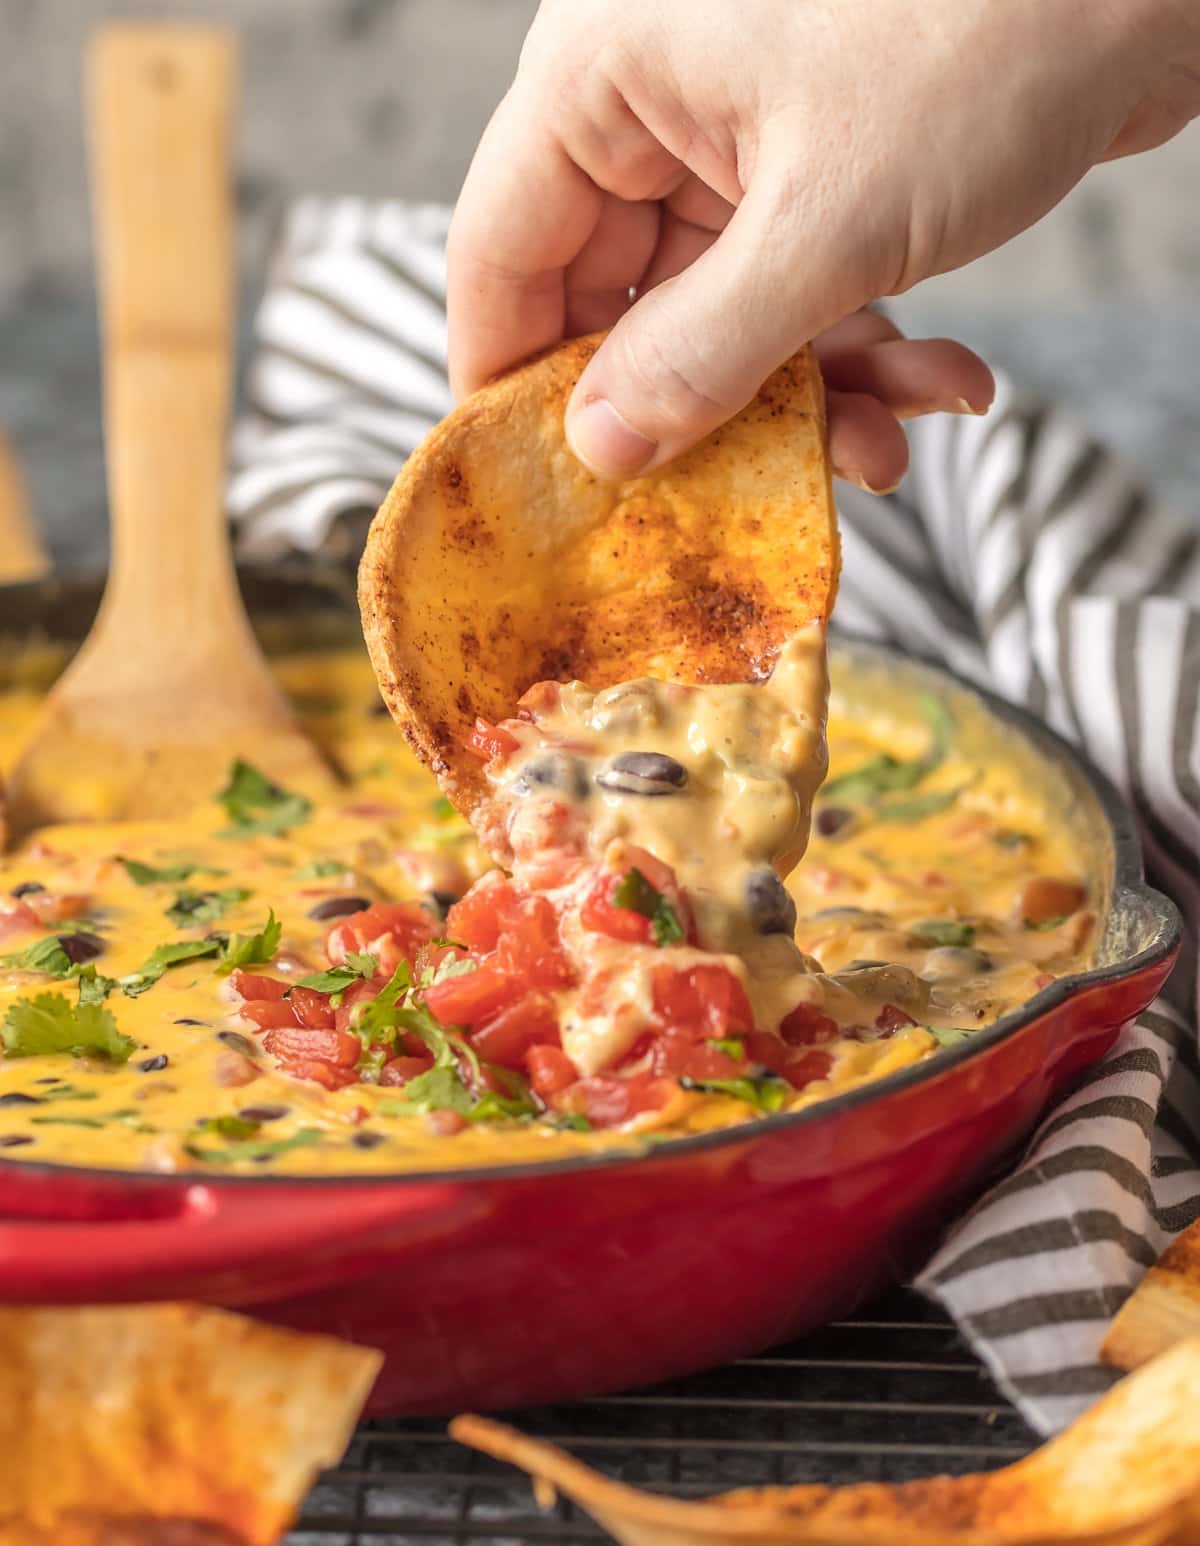 Taco boat chip dipping into velveeta cheese dip loaded with rotel, sausage, black beans, and more